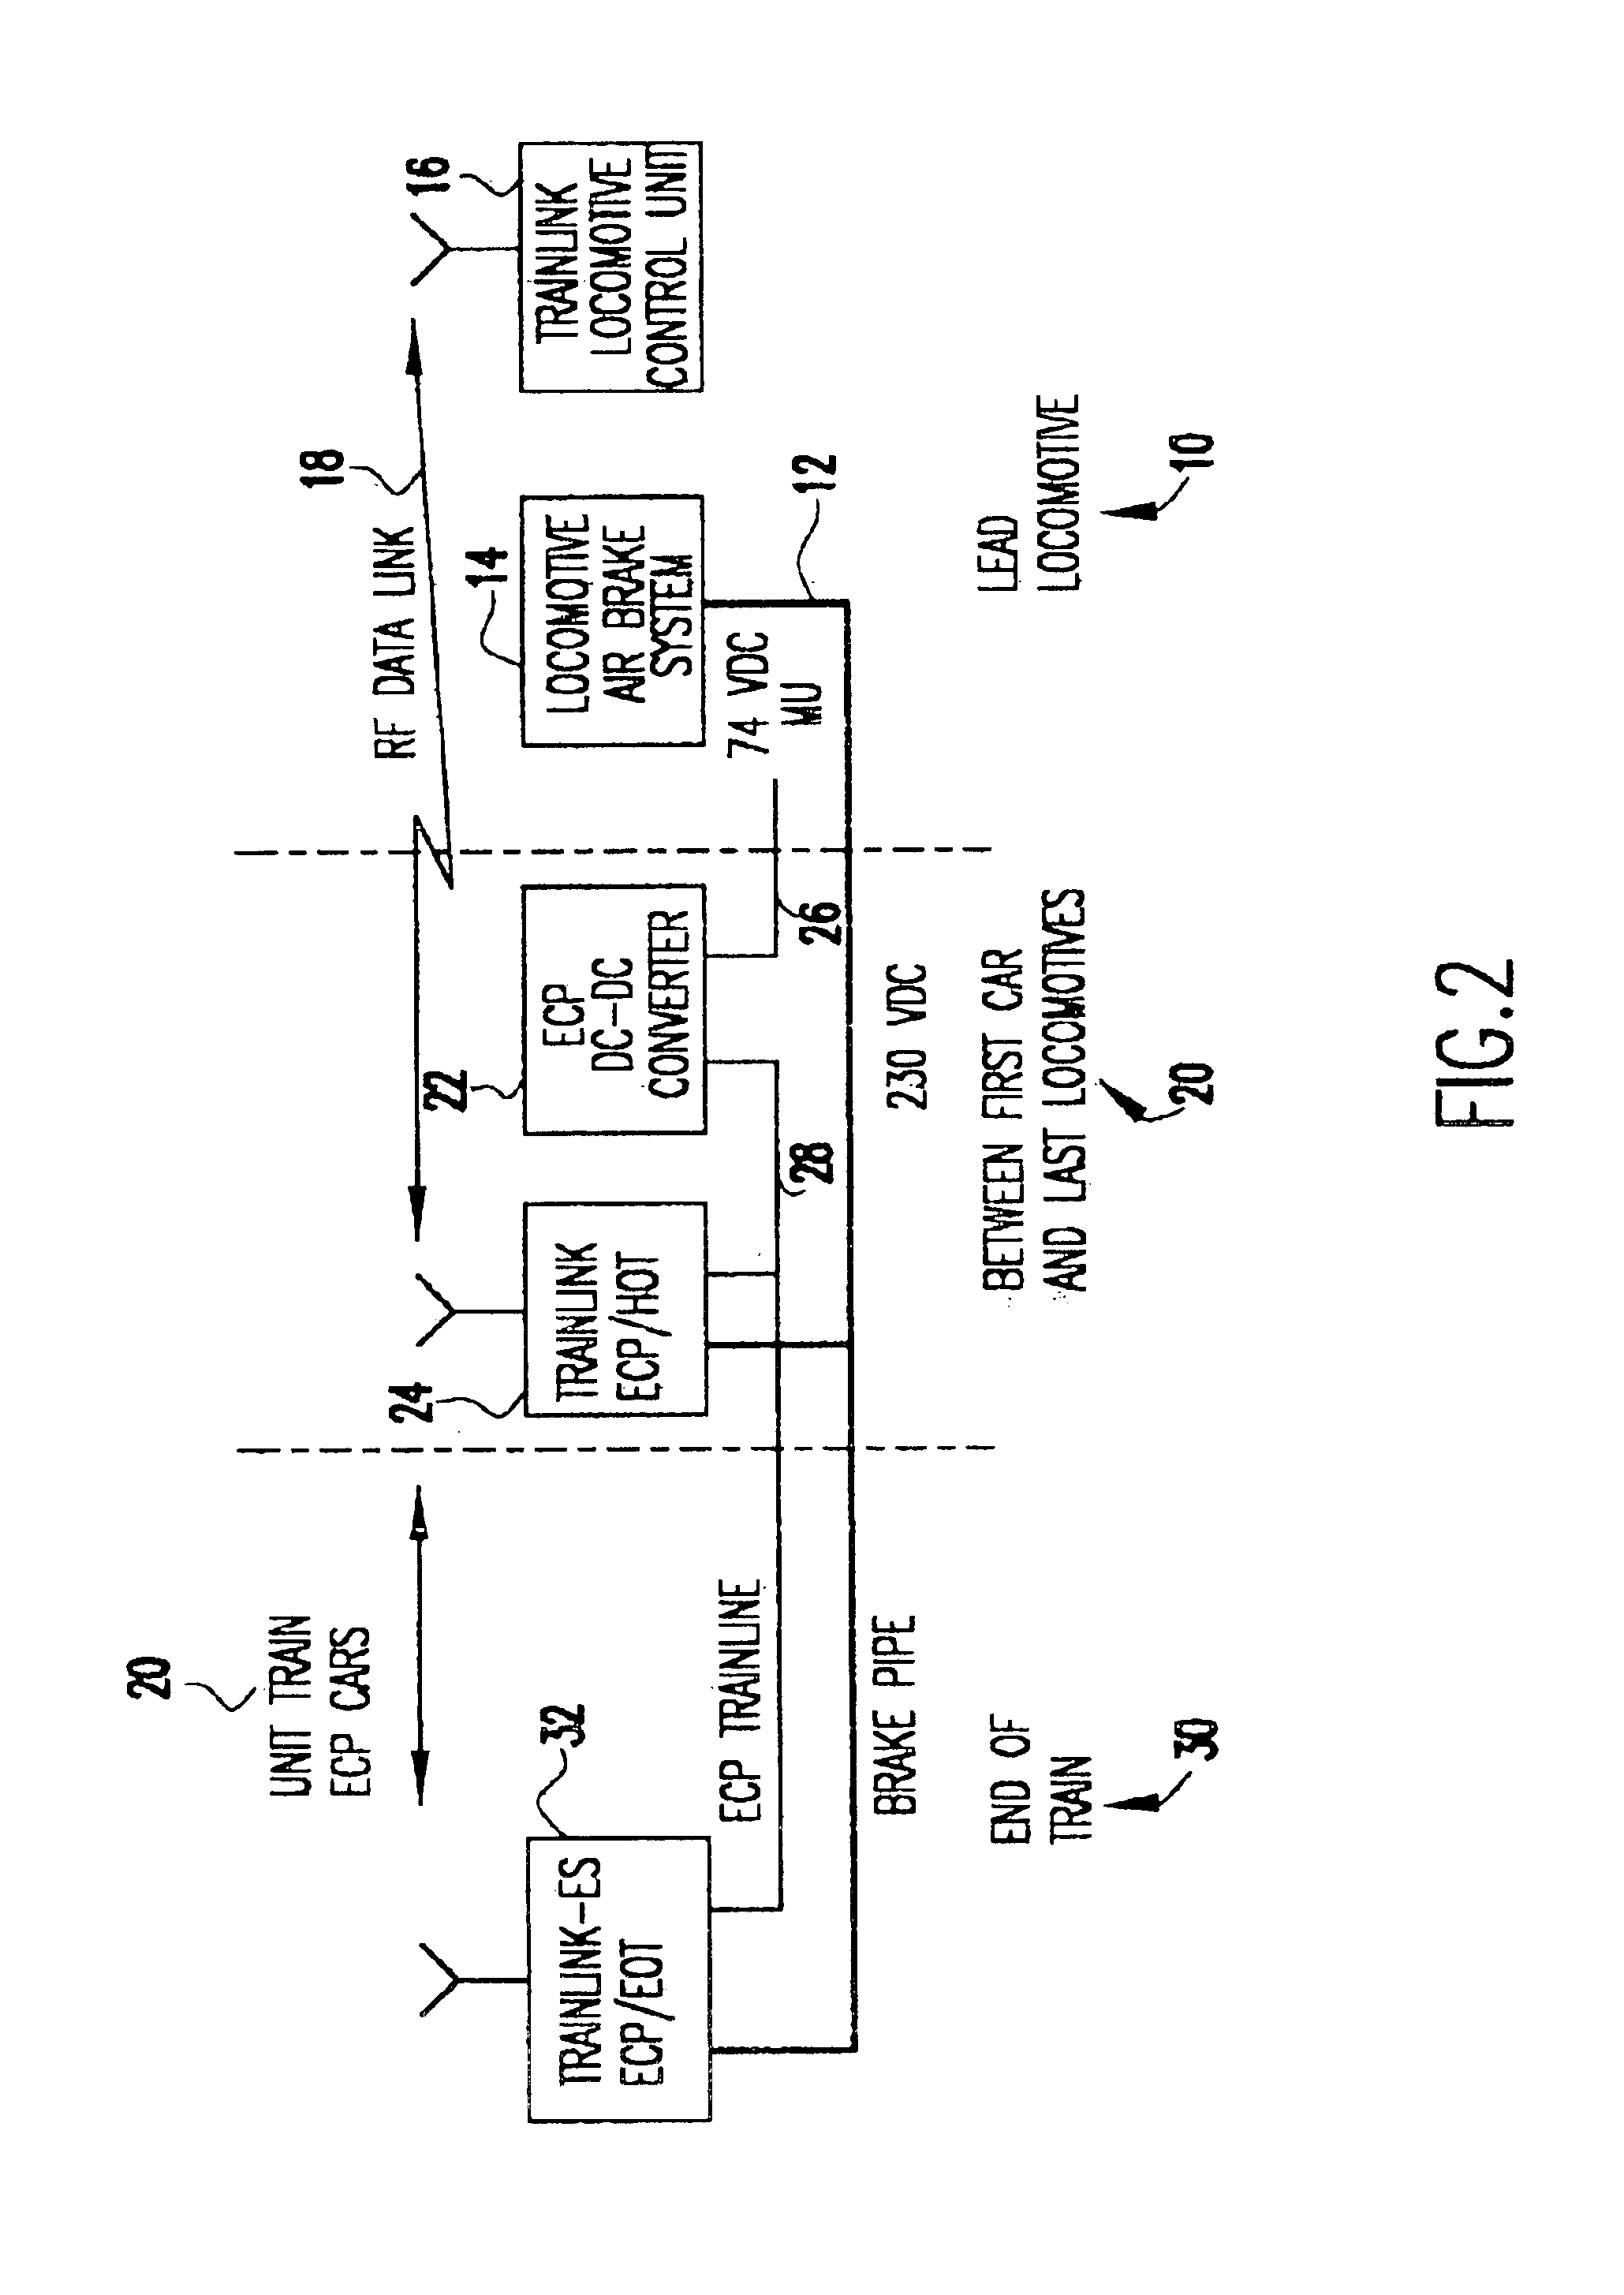 Electrically controlled pneumatic end of train pneumatic emulation system